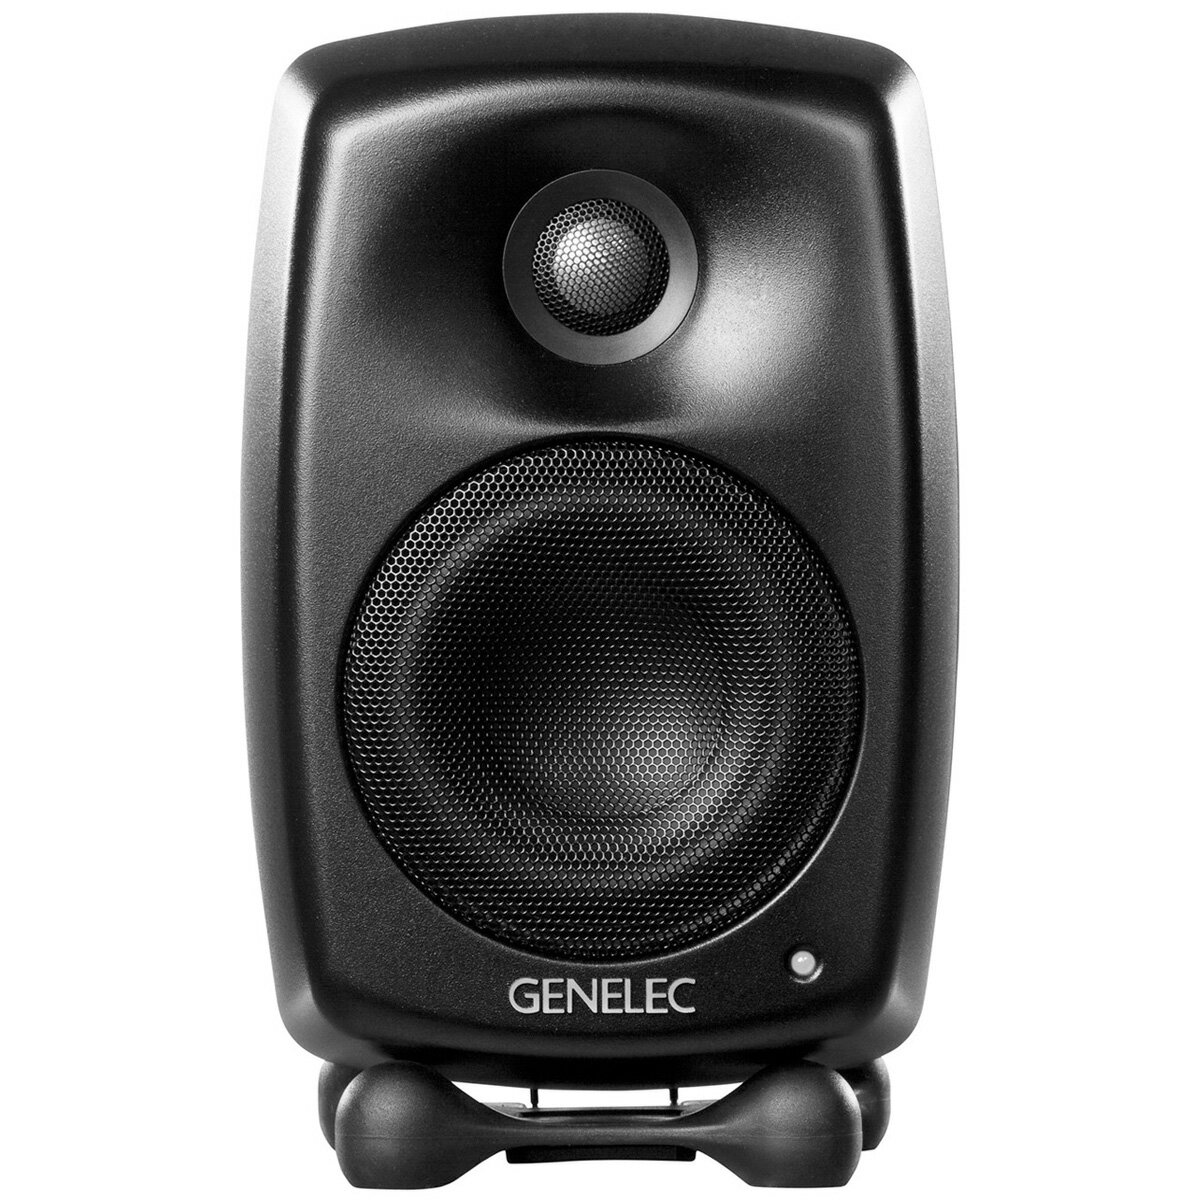 GENELEC ジェネレック / G Two ブラック (1本) Home Audio Systems【お取り寄せ商品】